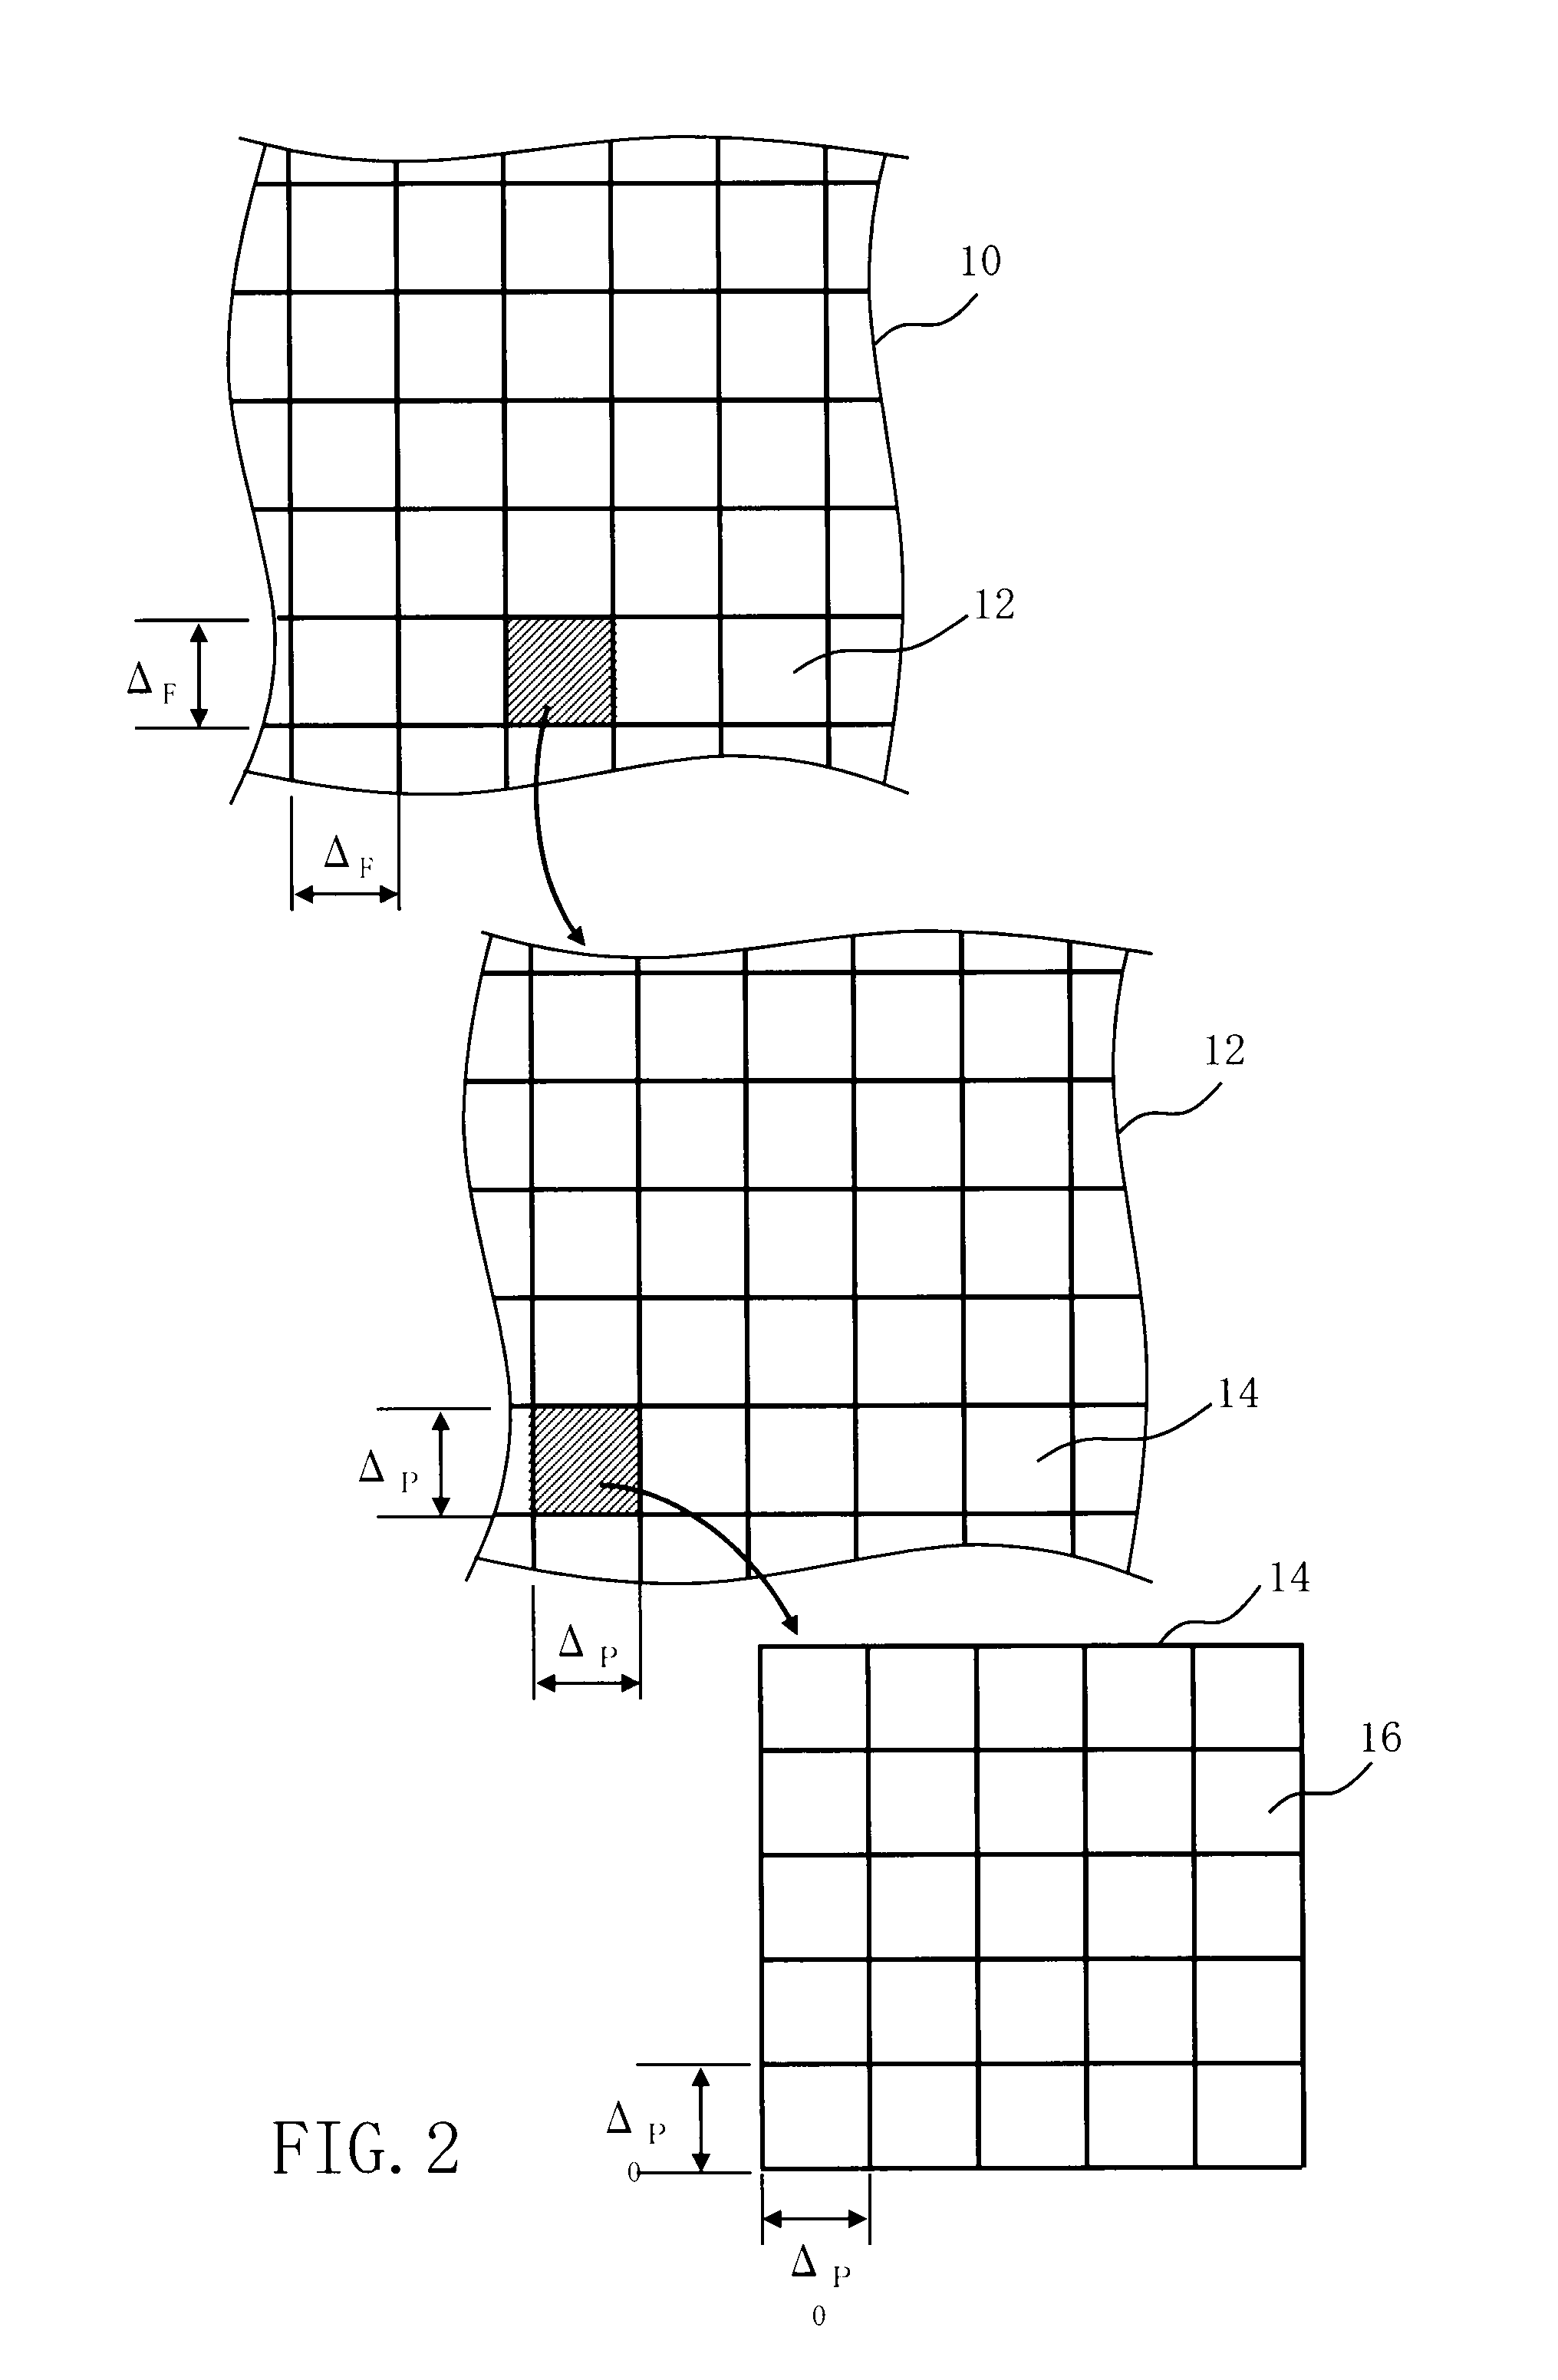 Method and apparatus for writing